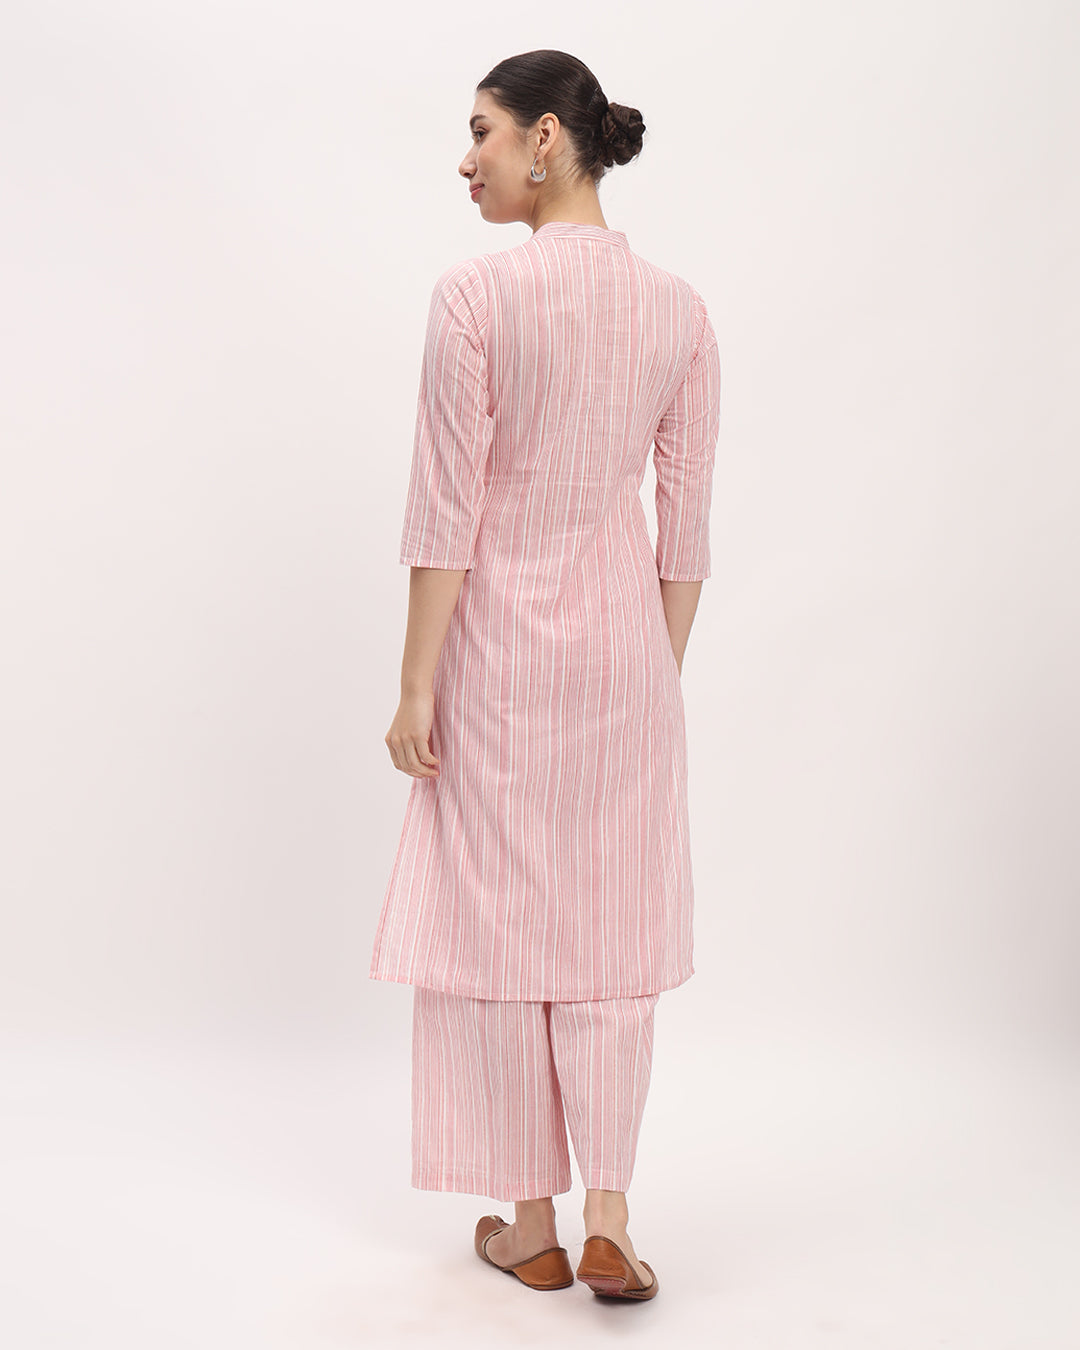 Combo: Blue Starry & Pink Chic Lines High-Low Printed Kurta (Without Bottoms)